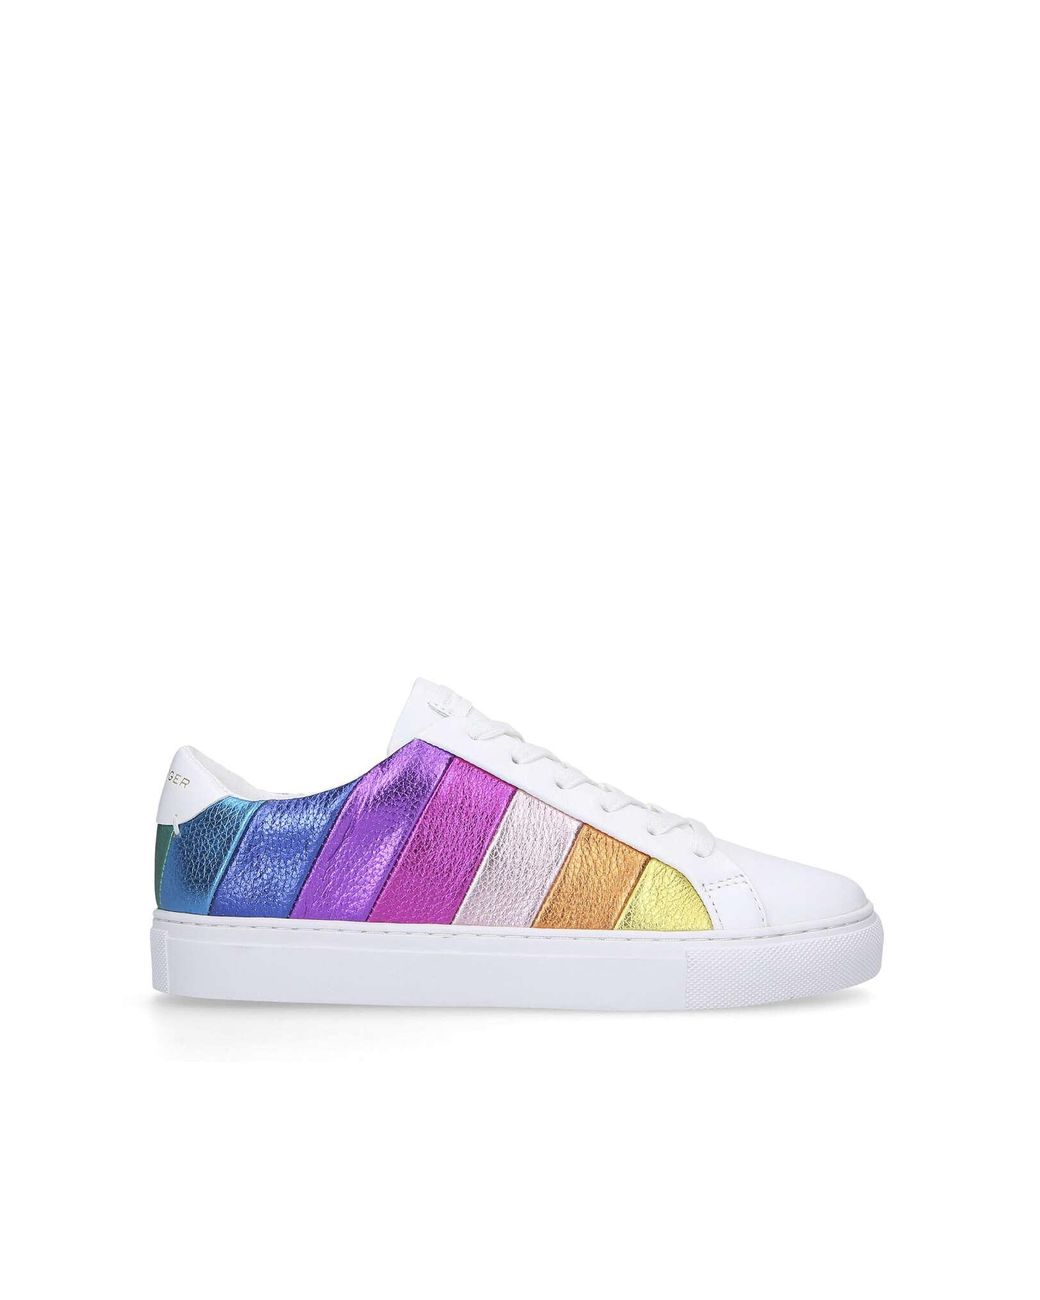 Kurt Geiger Leather Rainbow Stripe Lace Up Sneakers - Lyst